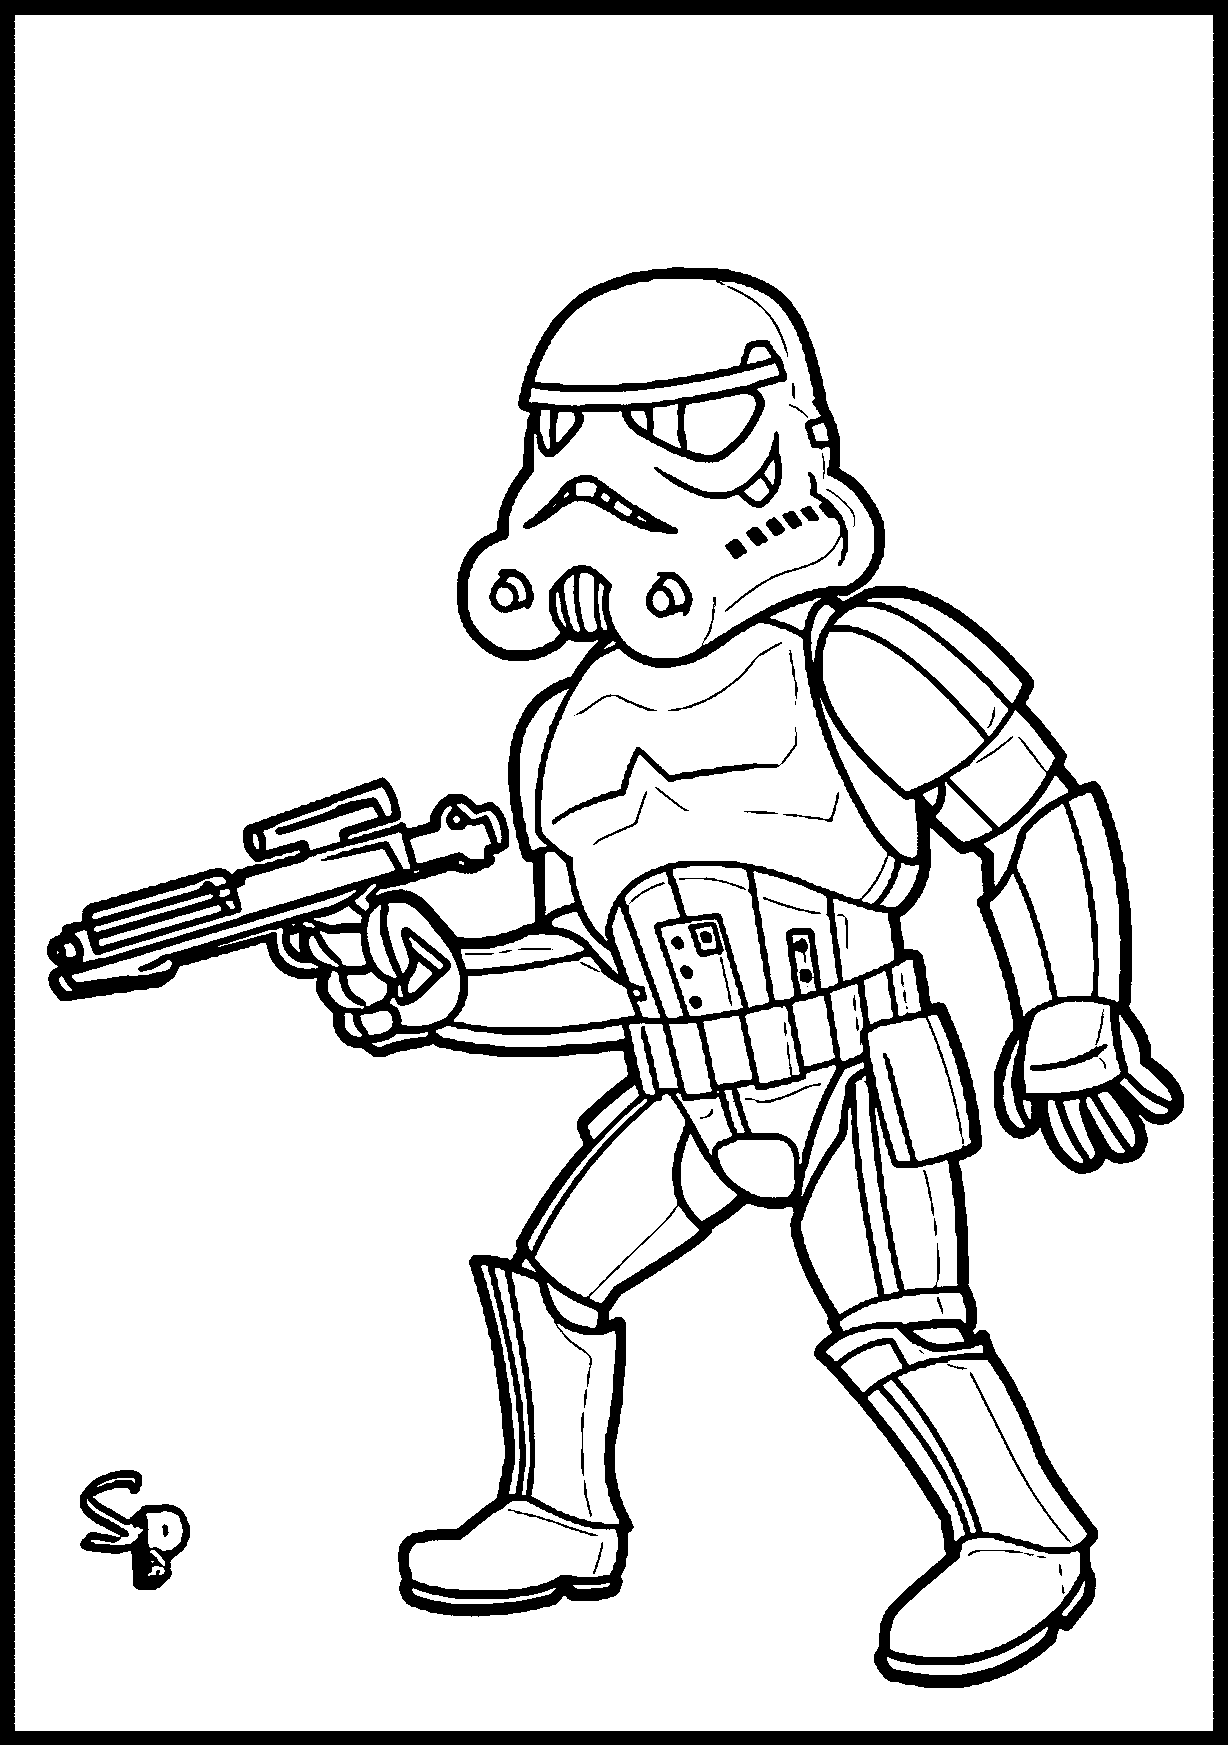 Download Stormtrooper Coloring Pages - Coloring Home